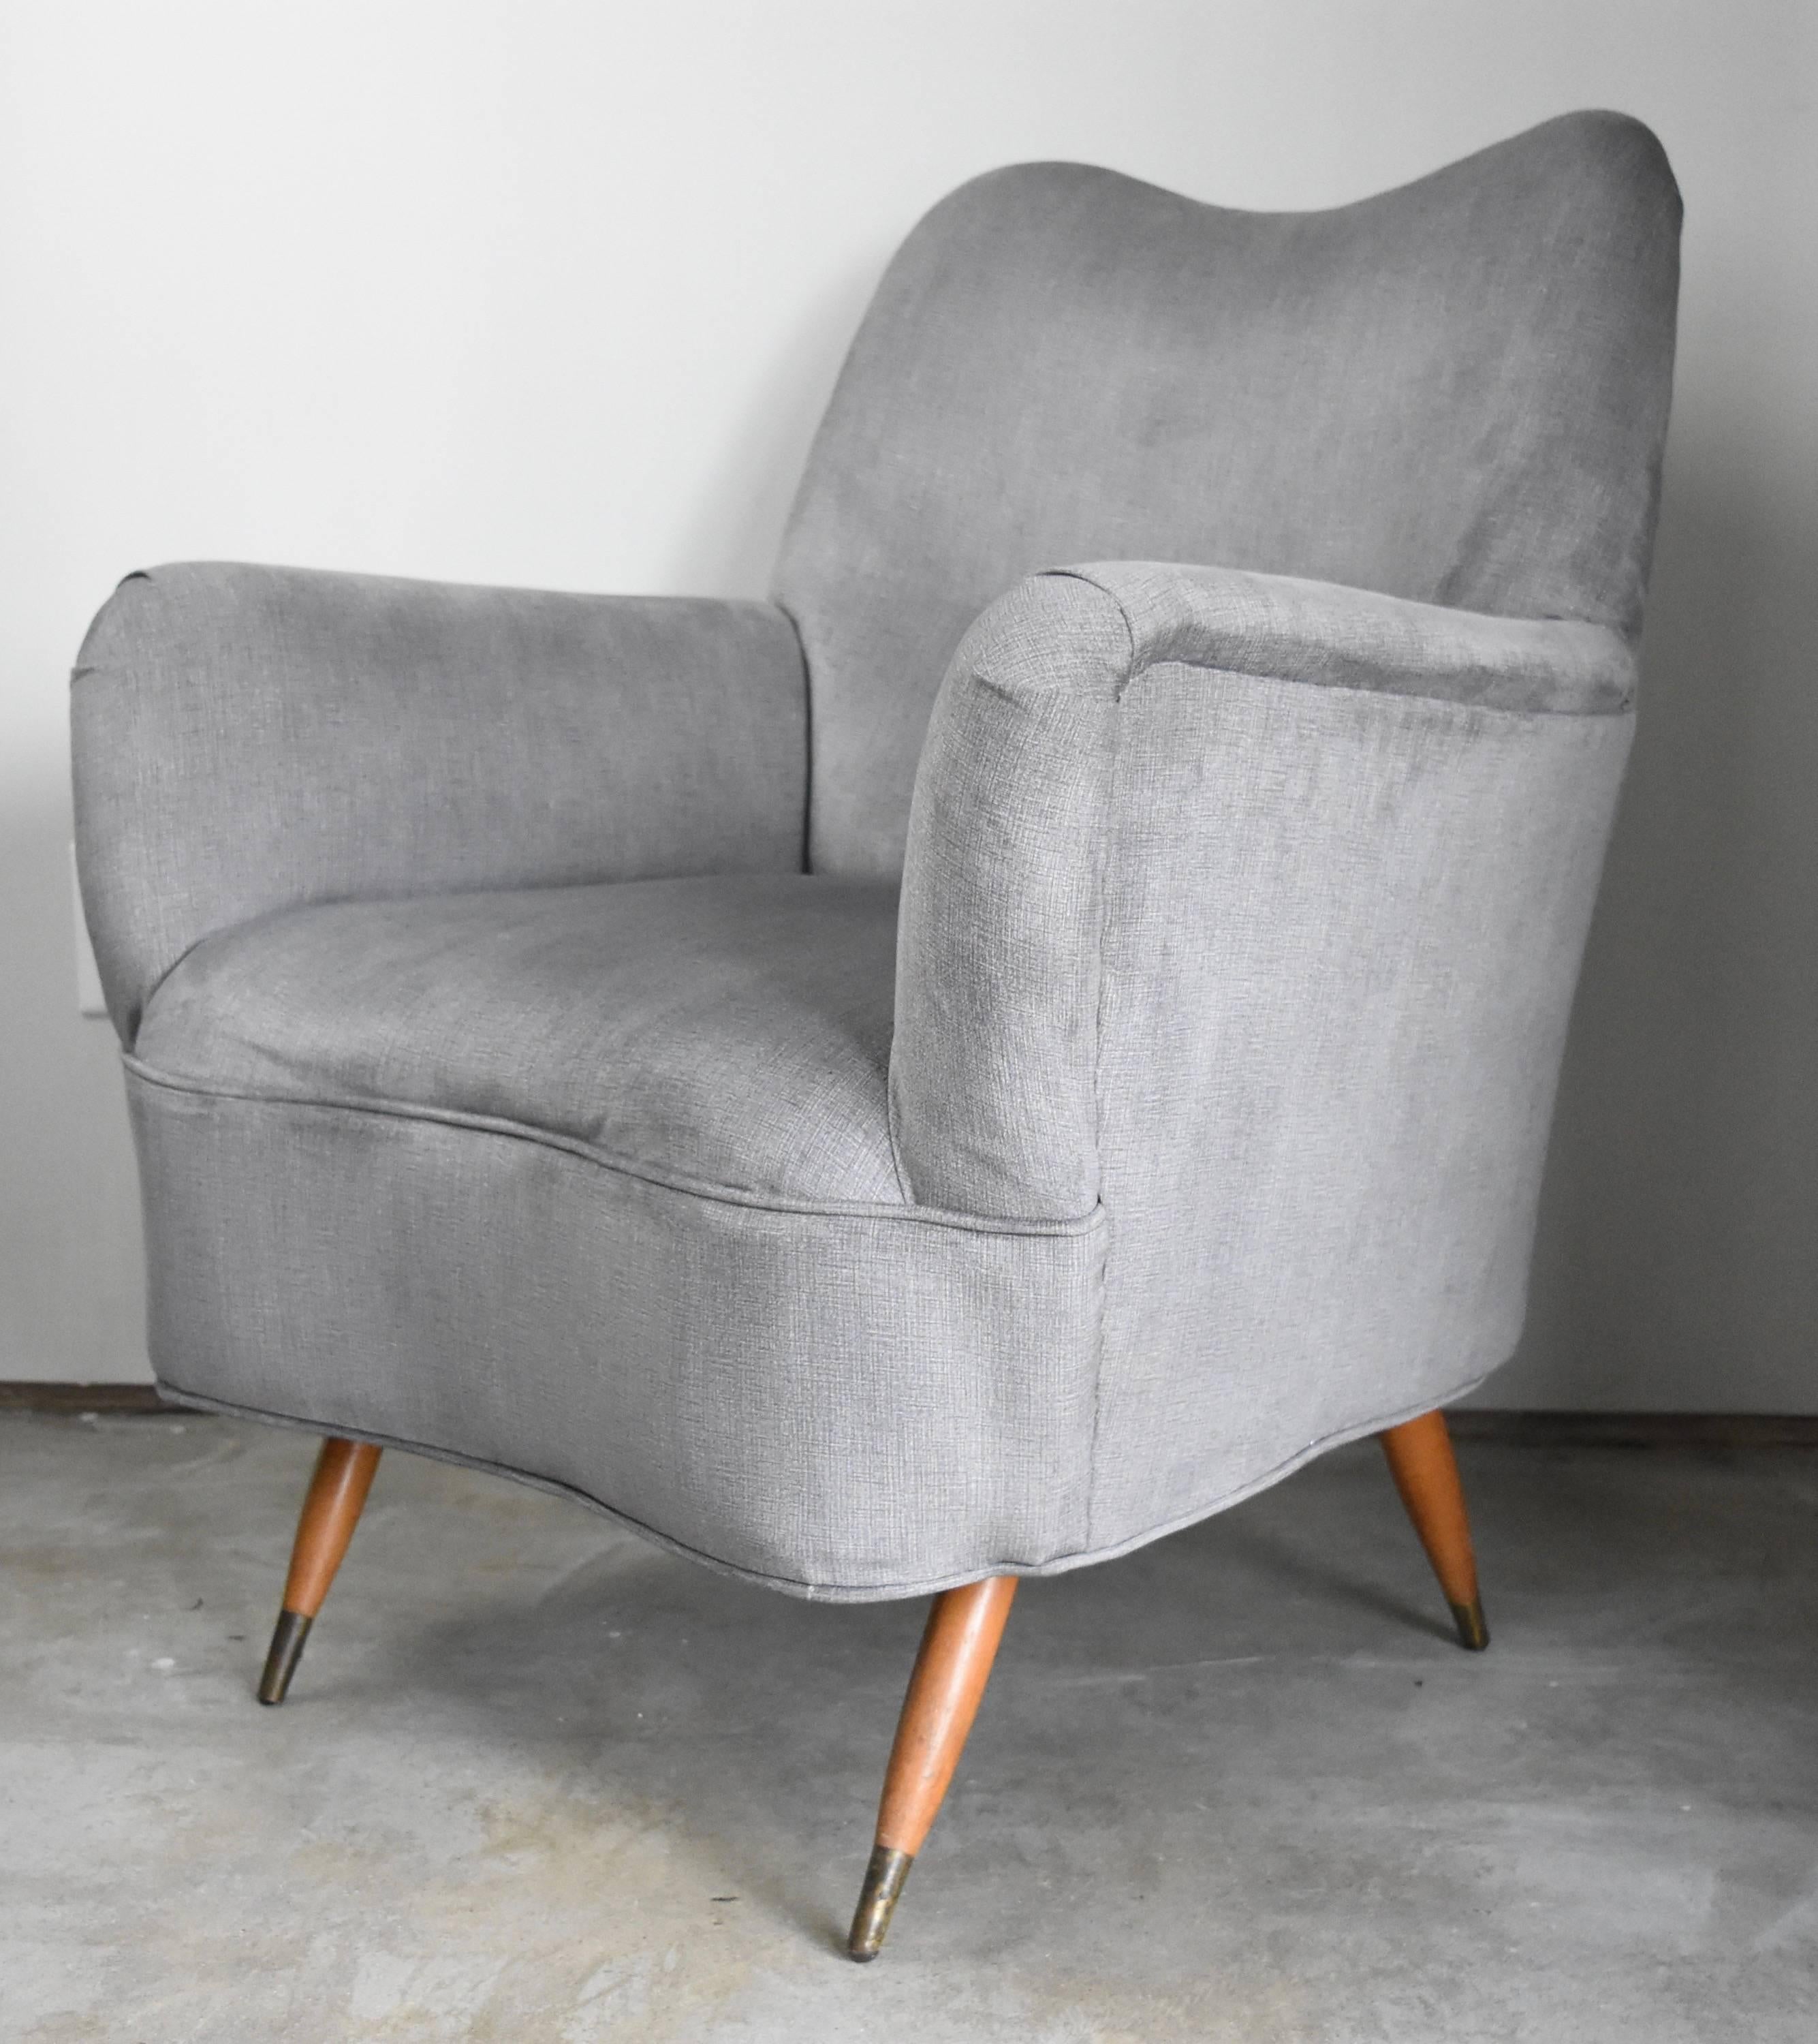 These Mid-Century Modern chairs are newly upholstered in beautiful silver low pile velvet. These are surprisingly heavy and constructed incredibly well. Believed to be Italian. The wear is on the legs where the brass tips have tarnished. Other that